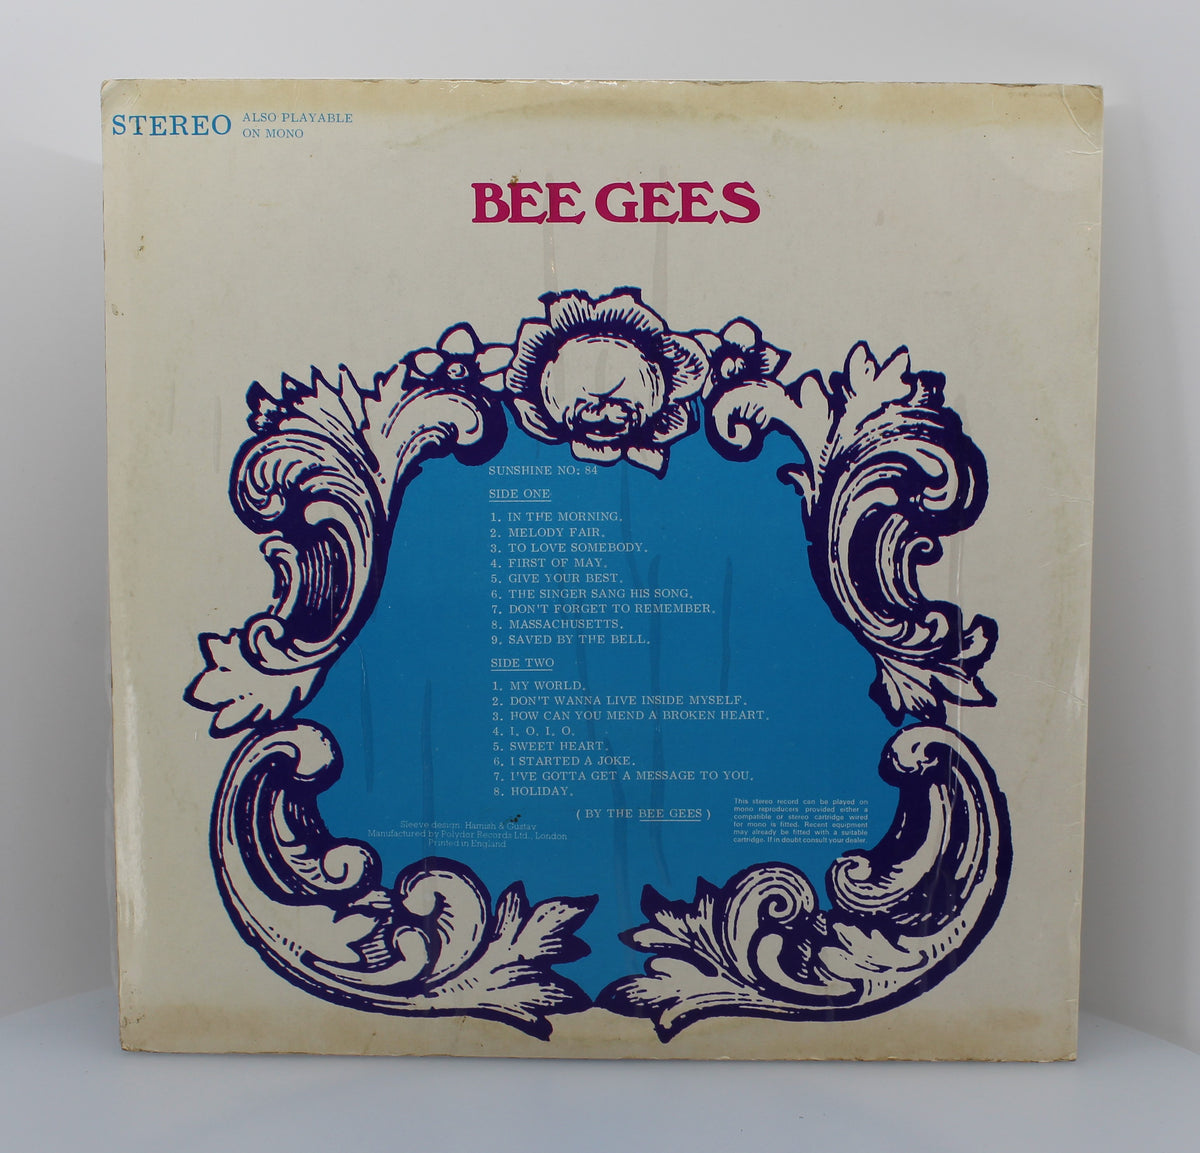 Bee Gees – Bee Gees, Vinyl, LP, Compilation, Unofficial Release, Stereo, Mono, Black Label, Japan